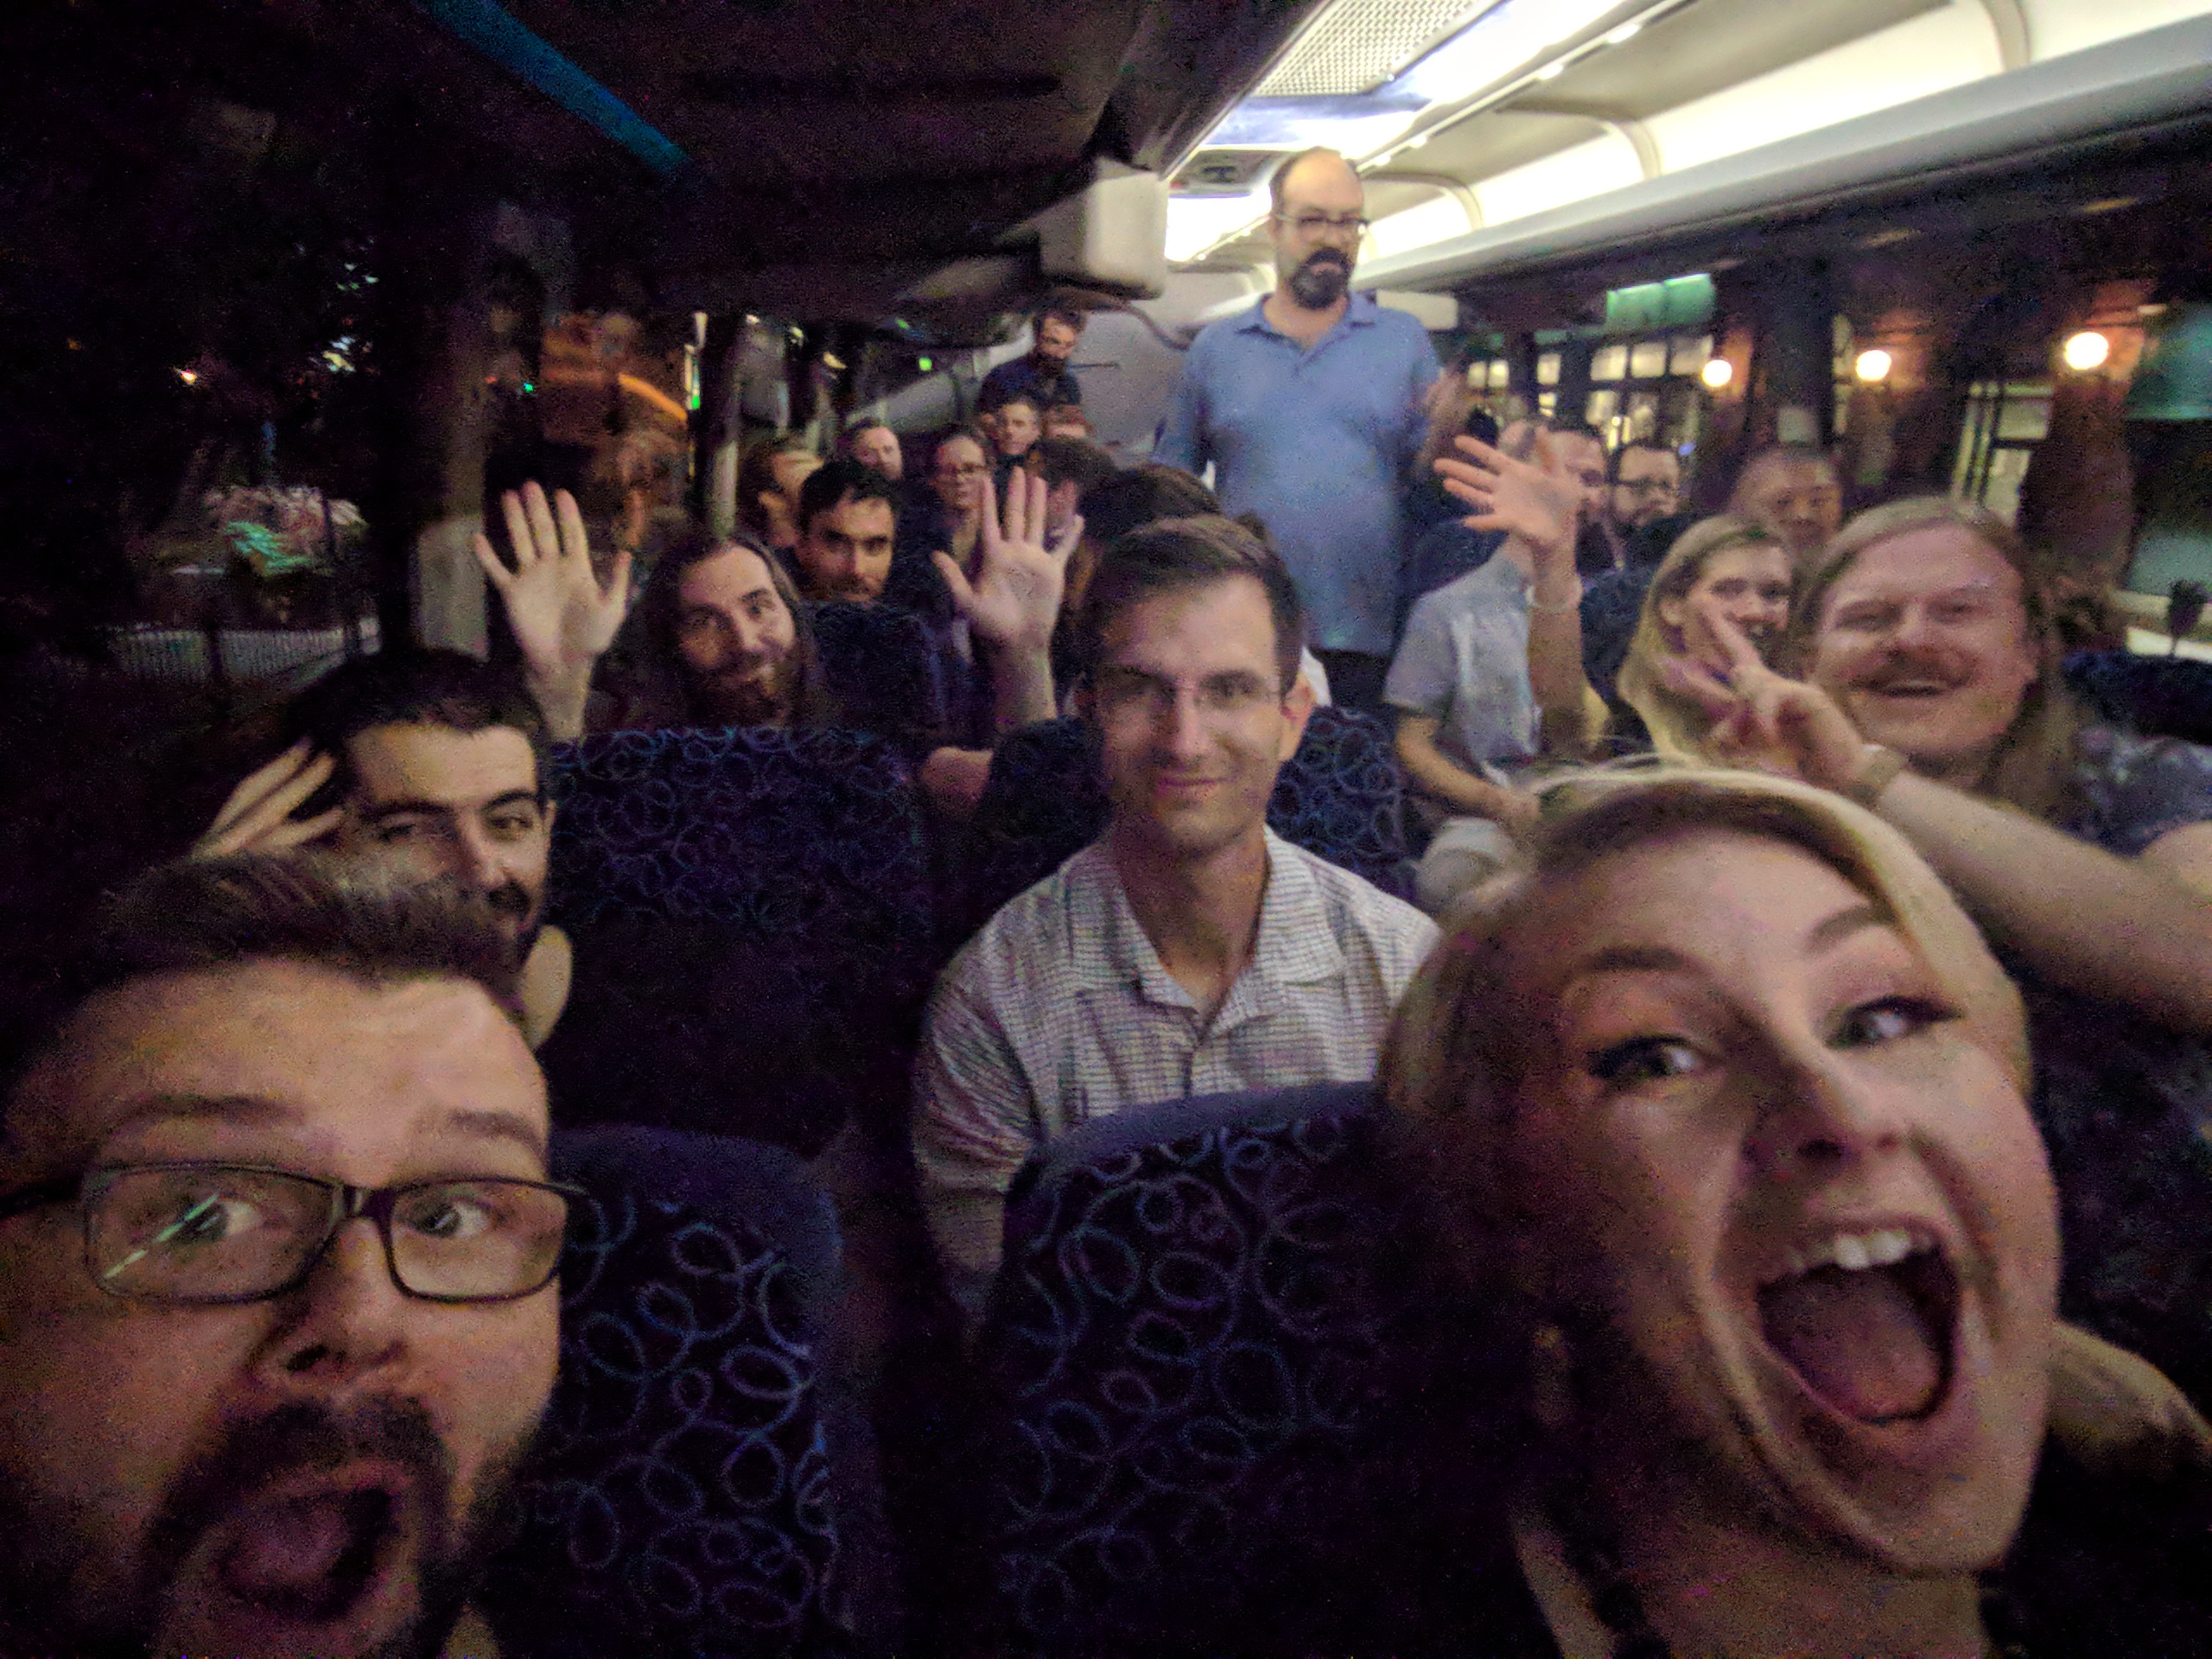 A selfie of many team members on a bus smiling and waving their hands